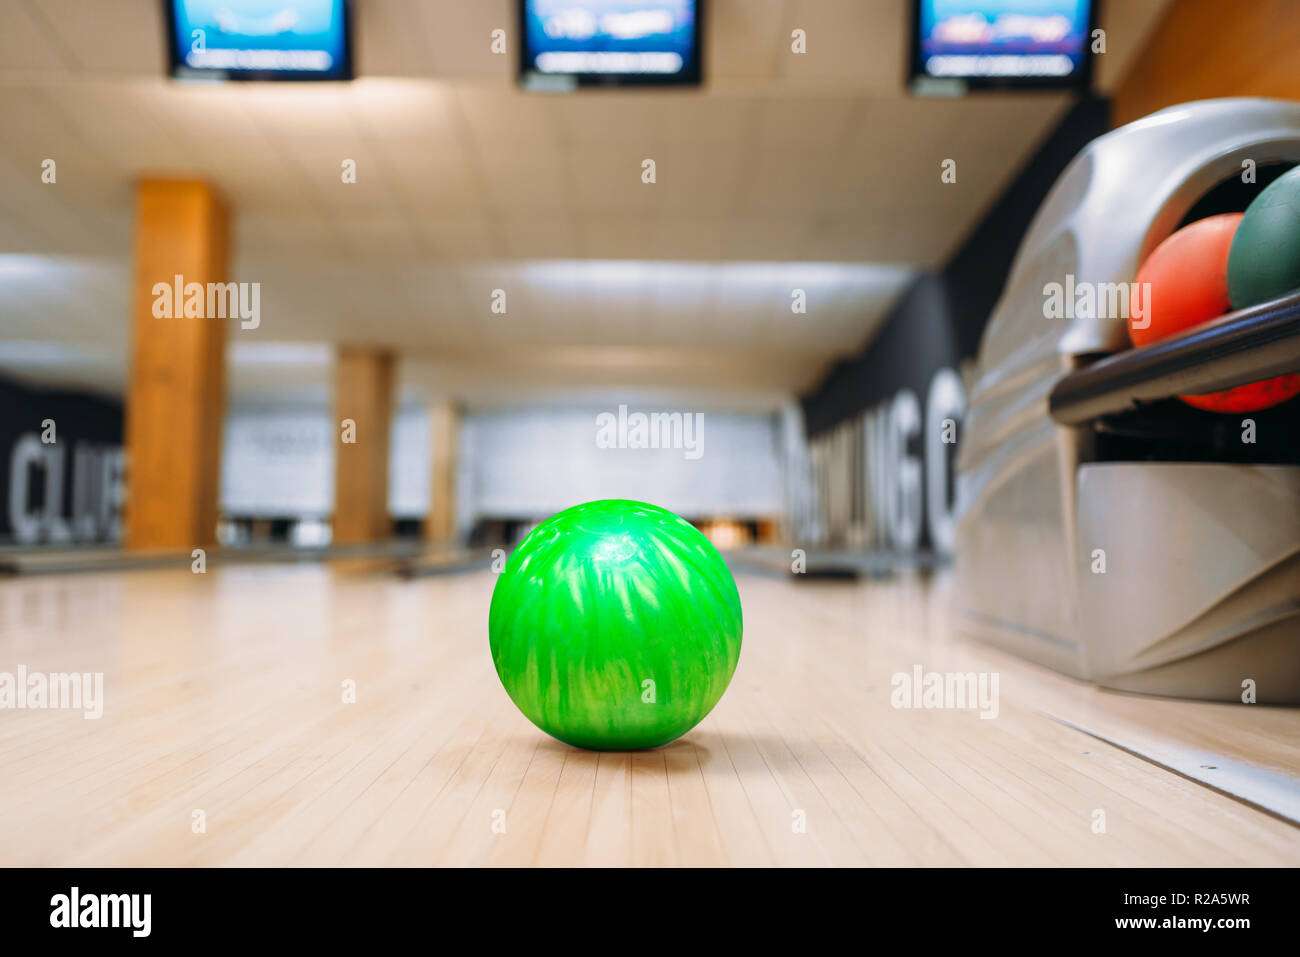 Green bowling ball on wooden floor in club, closeup view, nobody. Bowl game concept Stock Photo